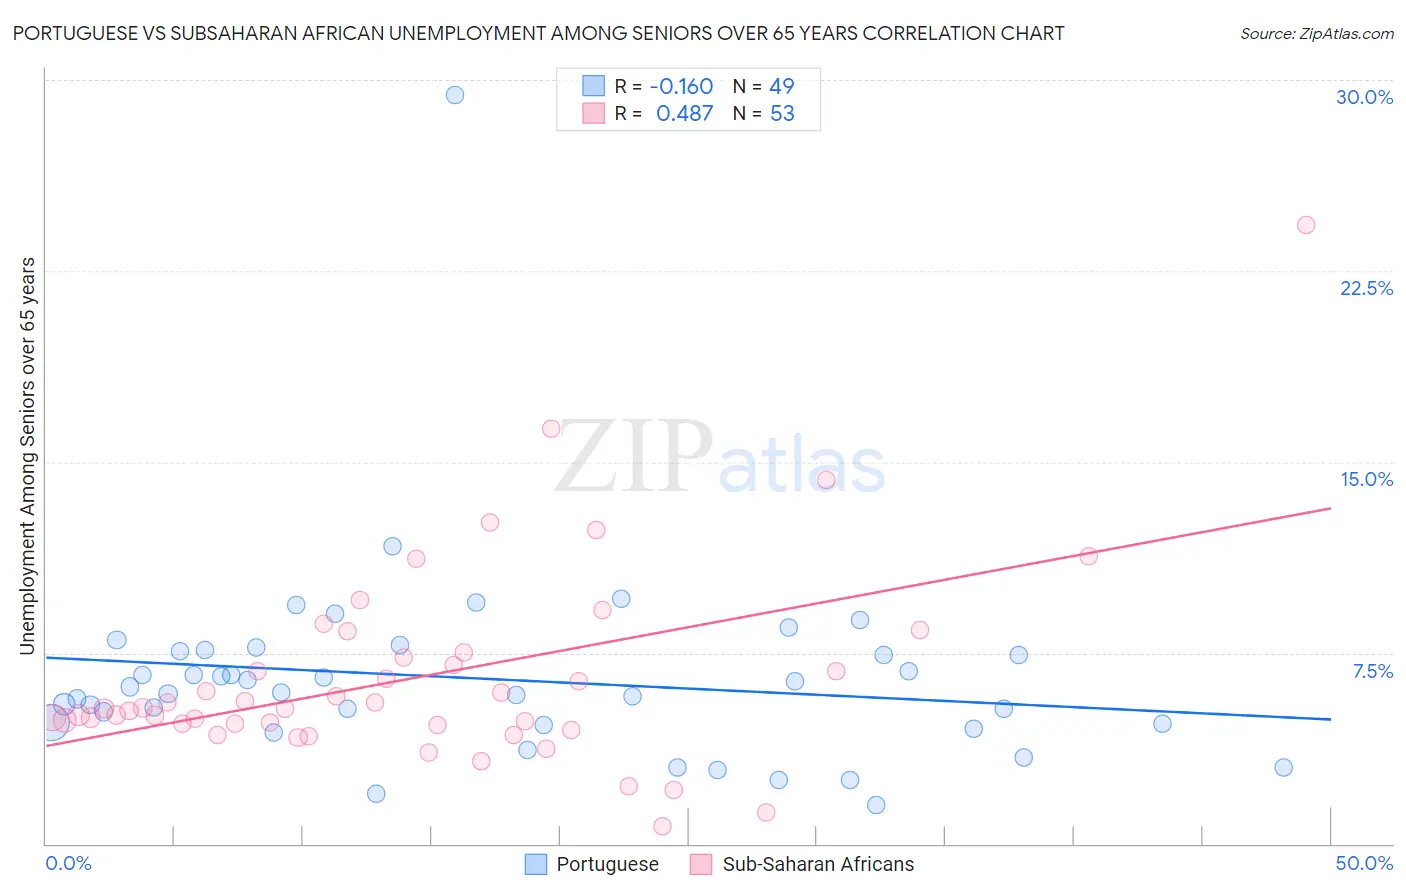 Portuguese vs Subsaharan African Unemployment Among Seniors over 65 years